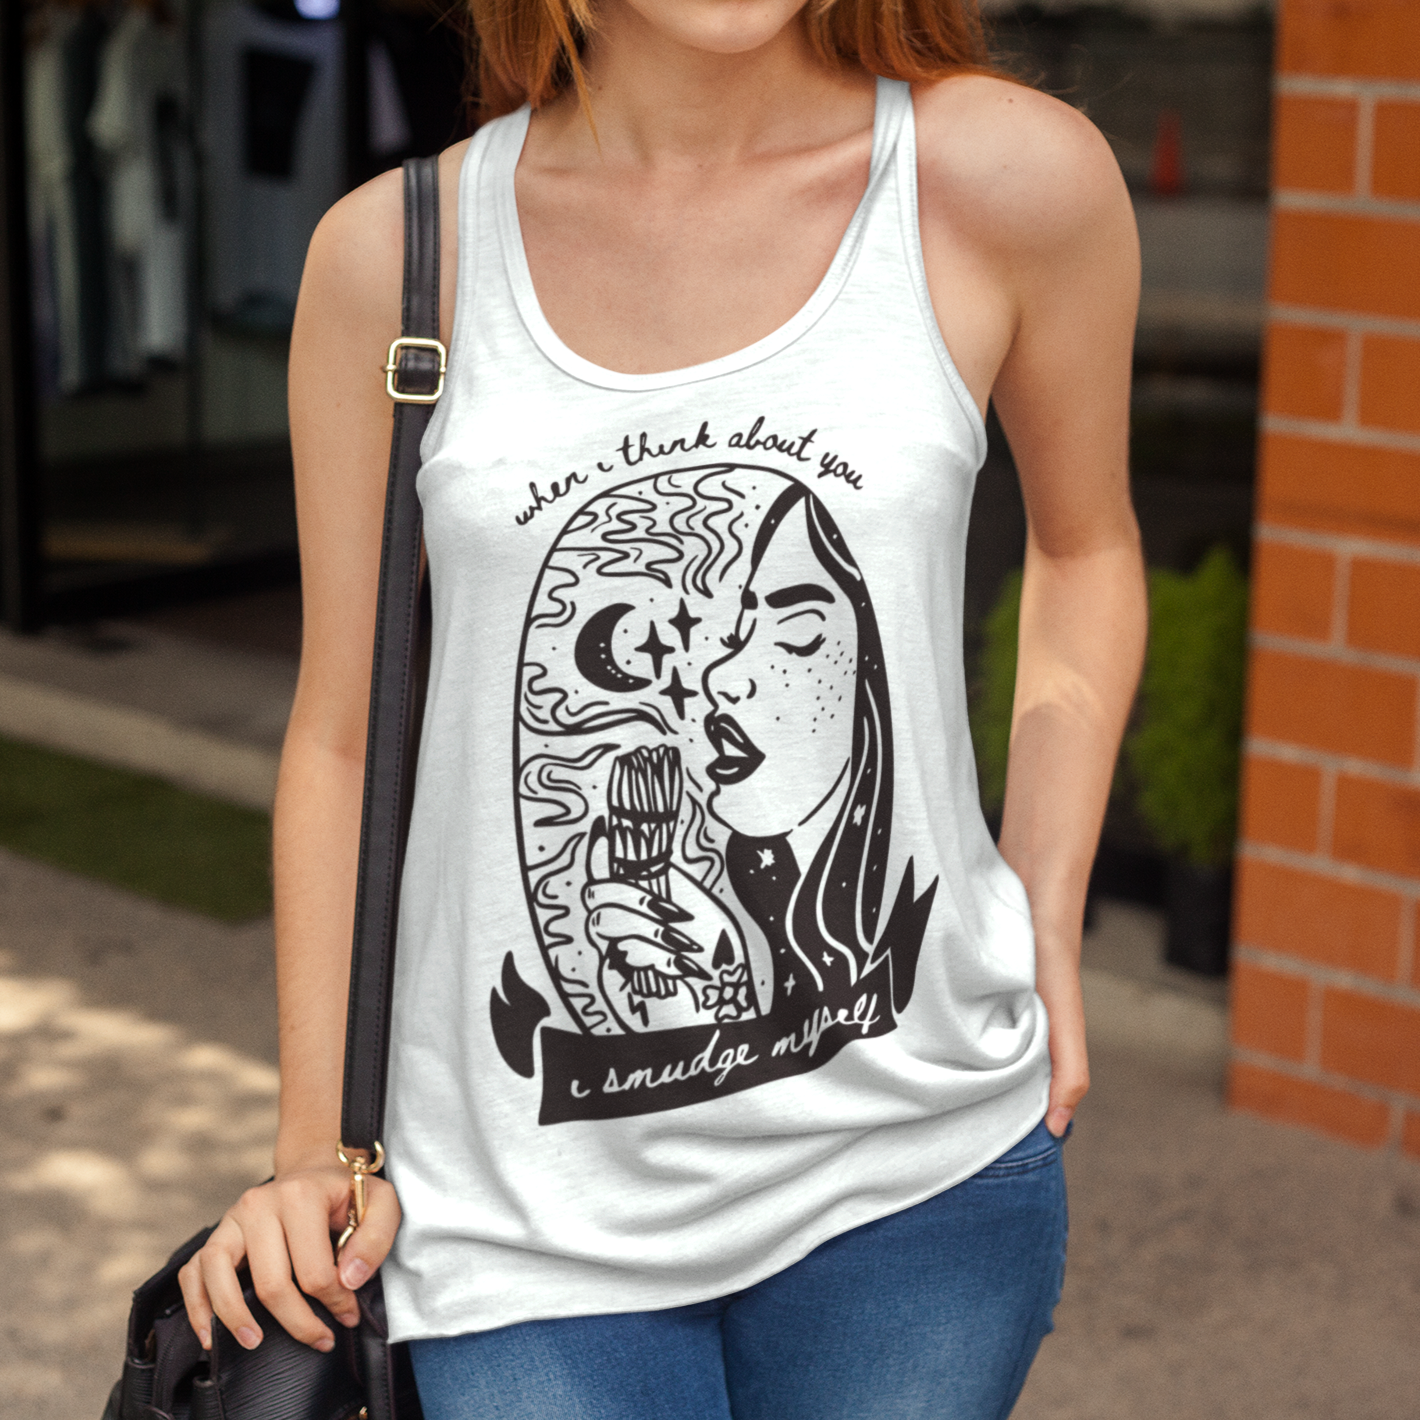 « WHEN I THINK ABOUT YOU I SMUDGE MYSELF » WOMEN'S SLOUCHY TANK